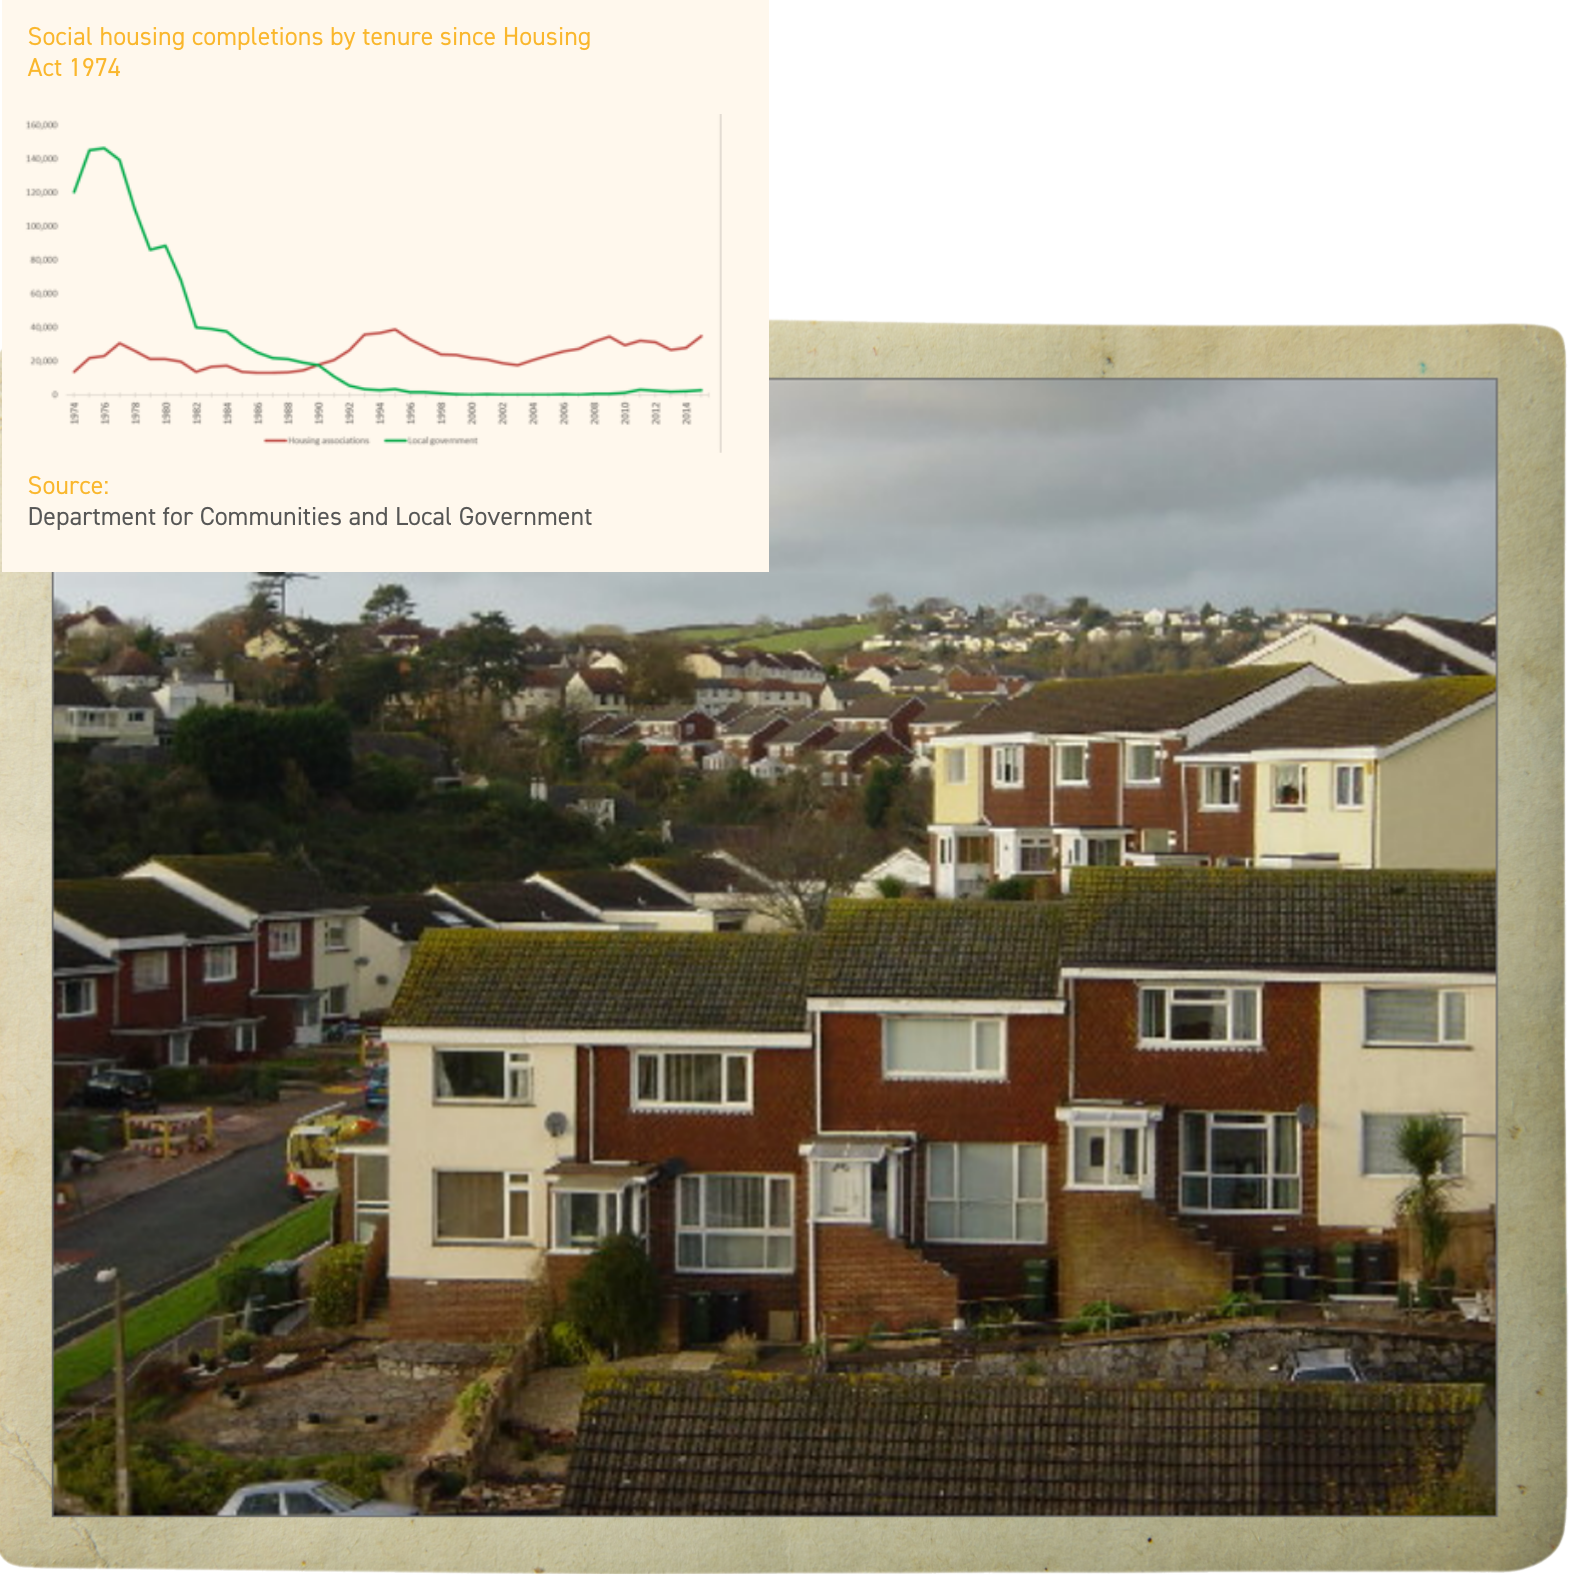 Terrace houses aerial with chart of social completions by tenure since Housing Act 1974